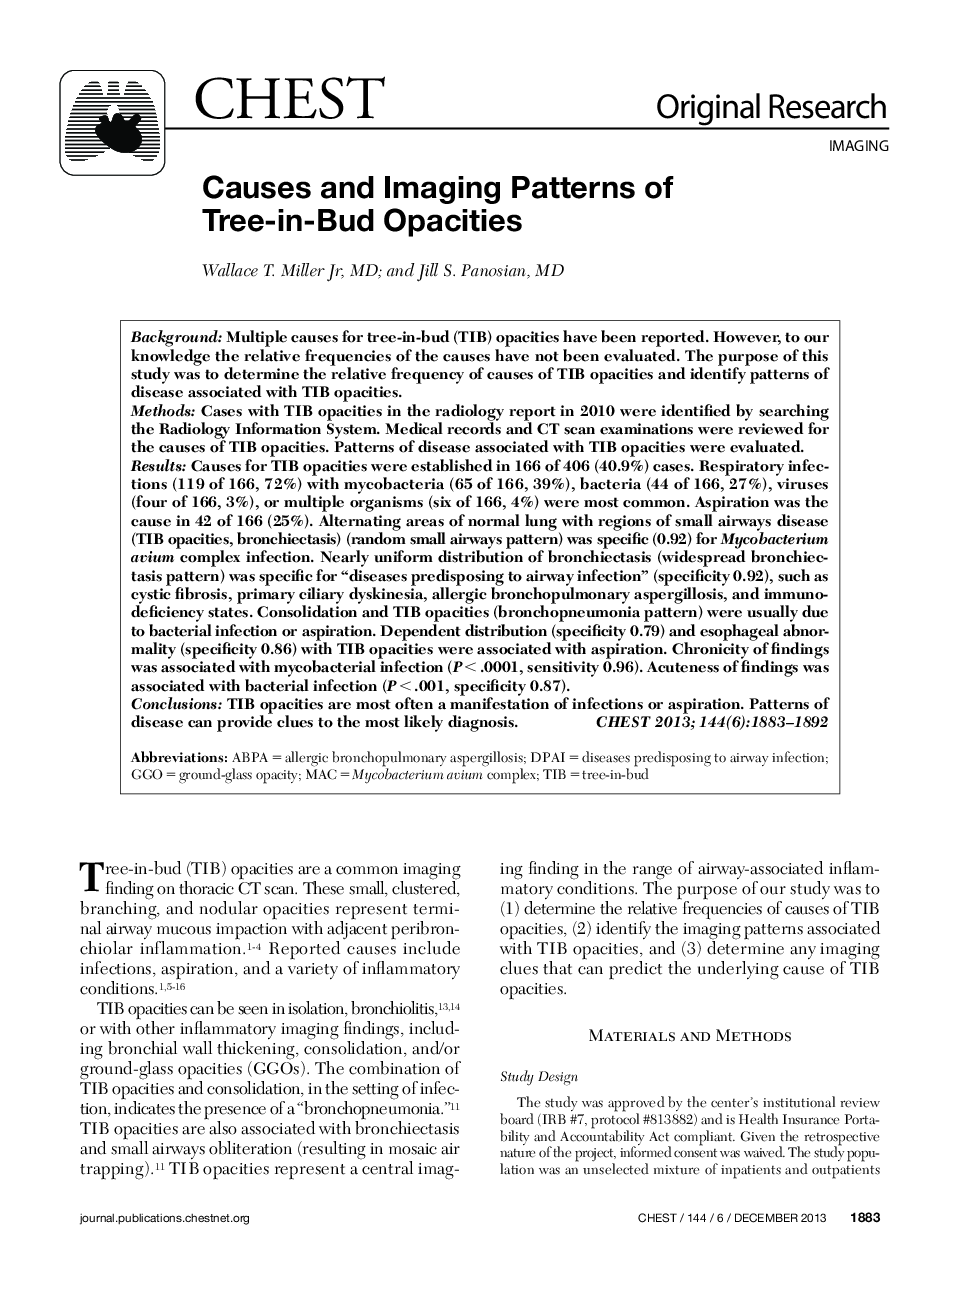 Causes and Imaging Patterns of Tree-in-Bud Opacities 